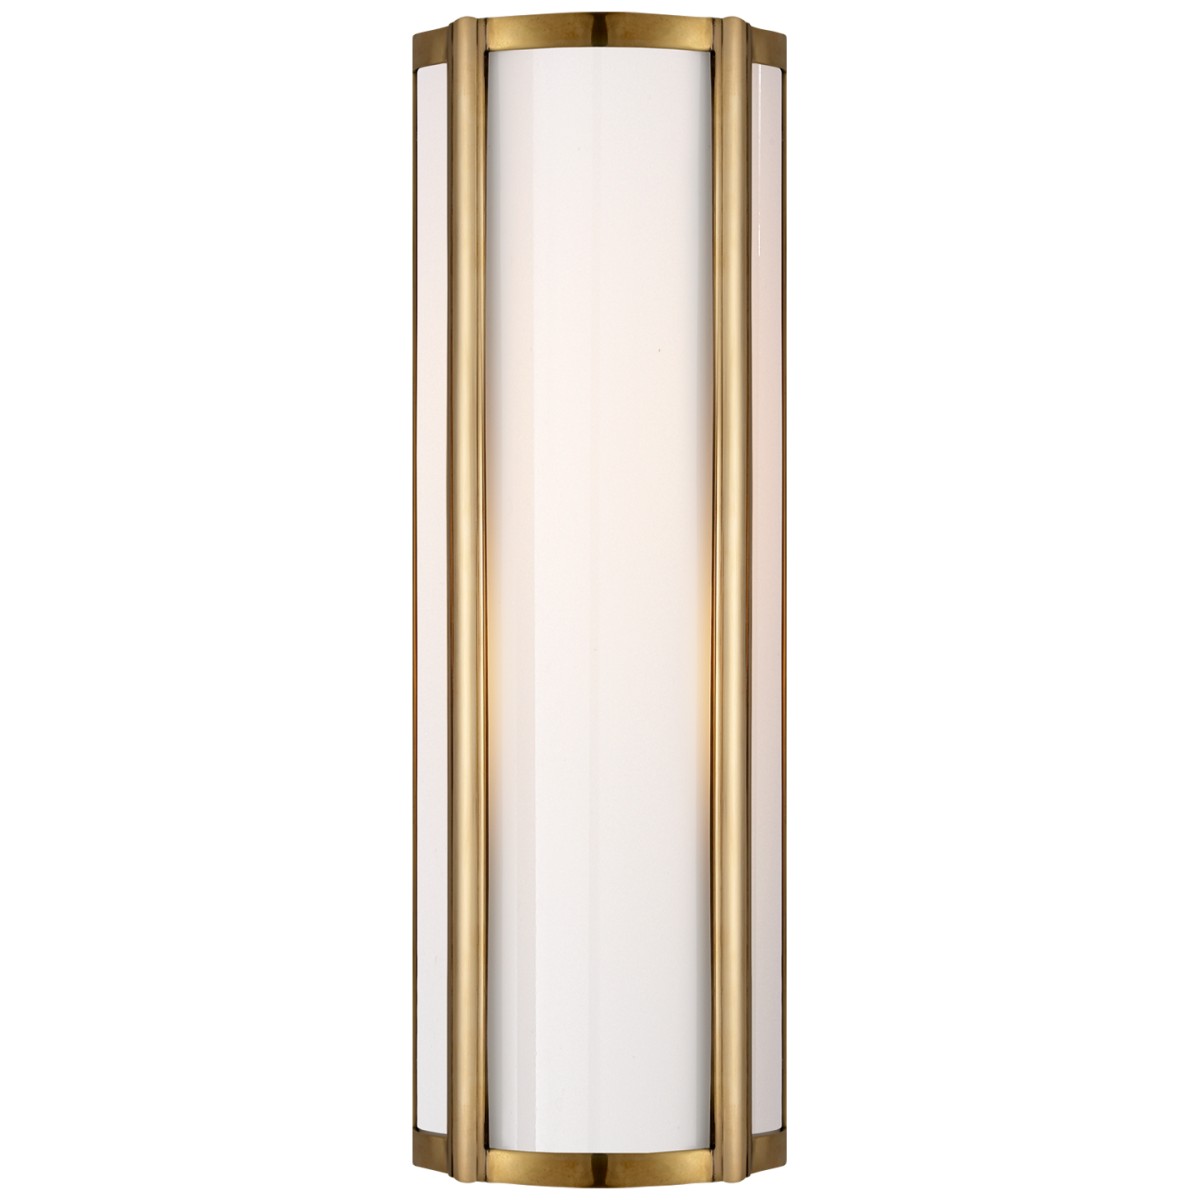 Basil Small Linear Sconce with White Glass